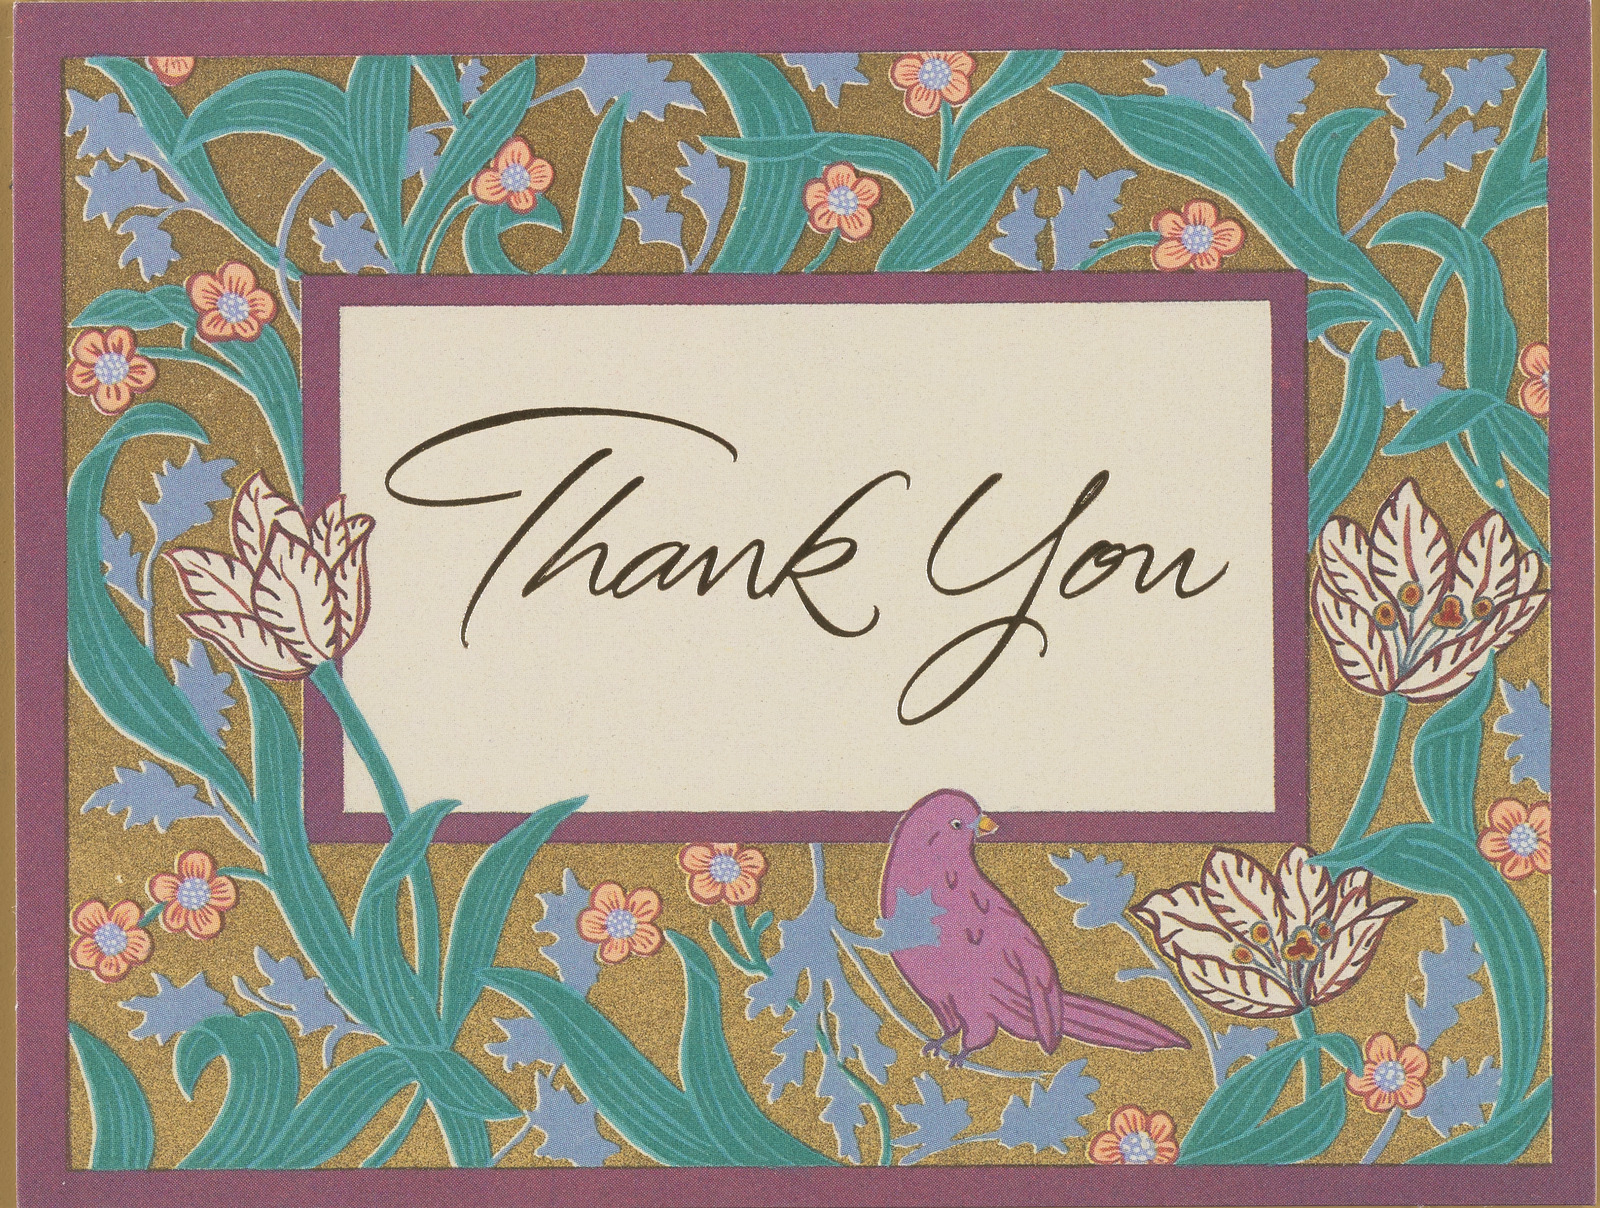 Thank you note to Ron Lurie from Michele Saxter, front